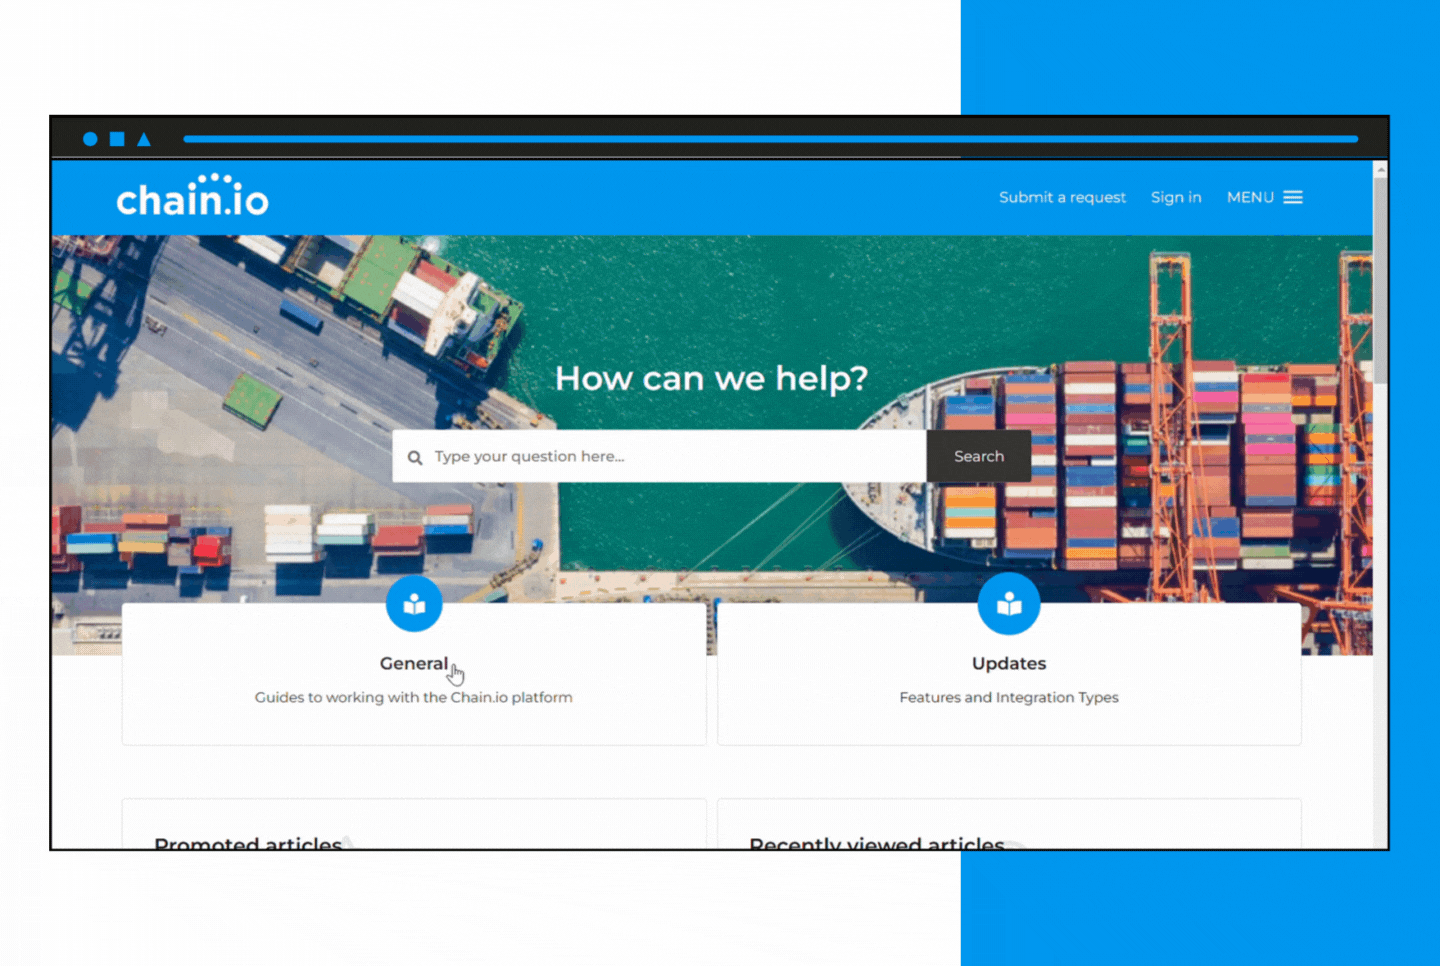 That's why we're thrilled to announce the launch of our new support resources, designed to enhance product knowledge, offer step-by-step guidance, and empower seamless supply chain integrations.